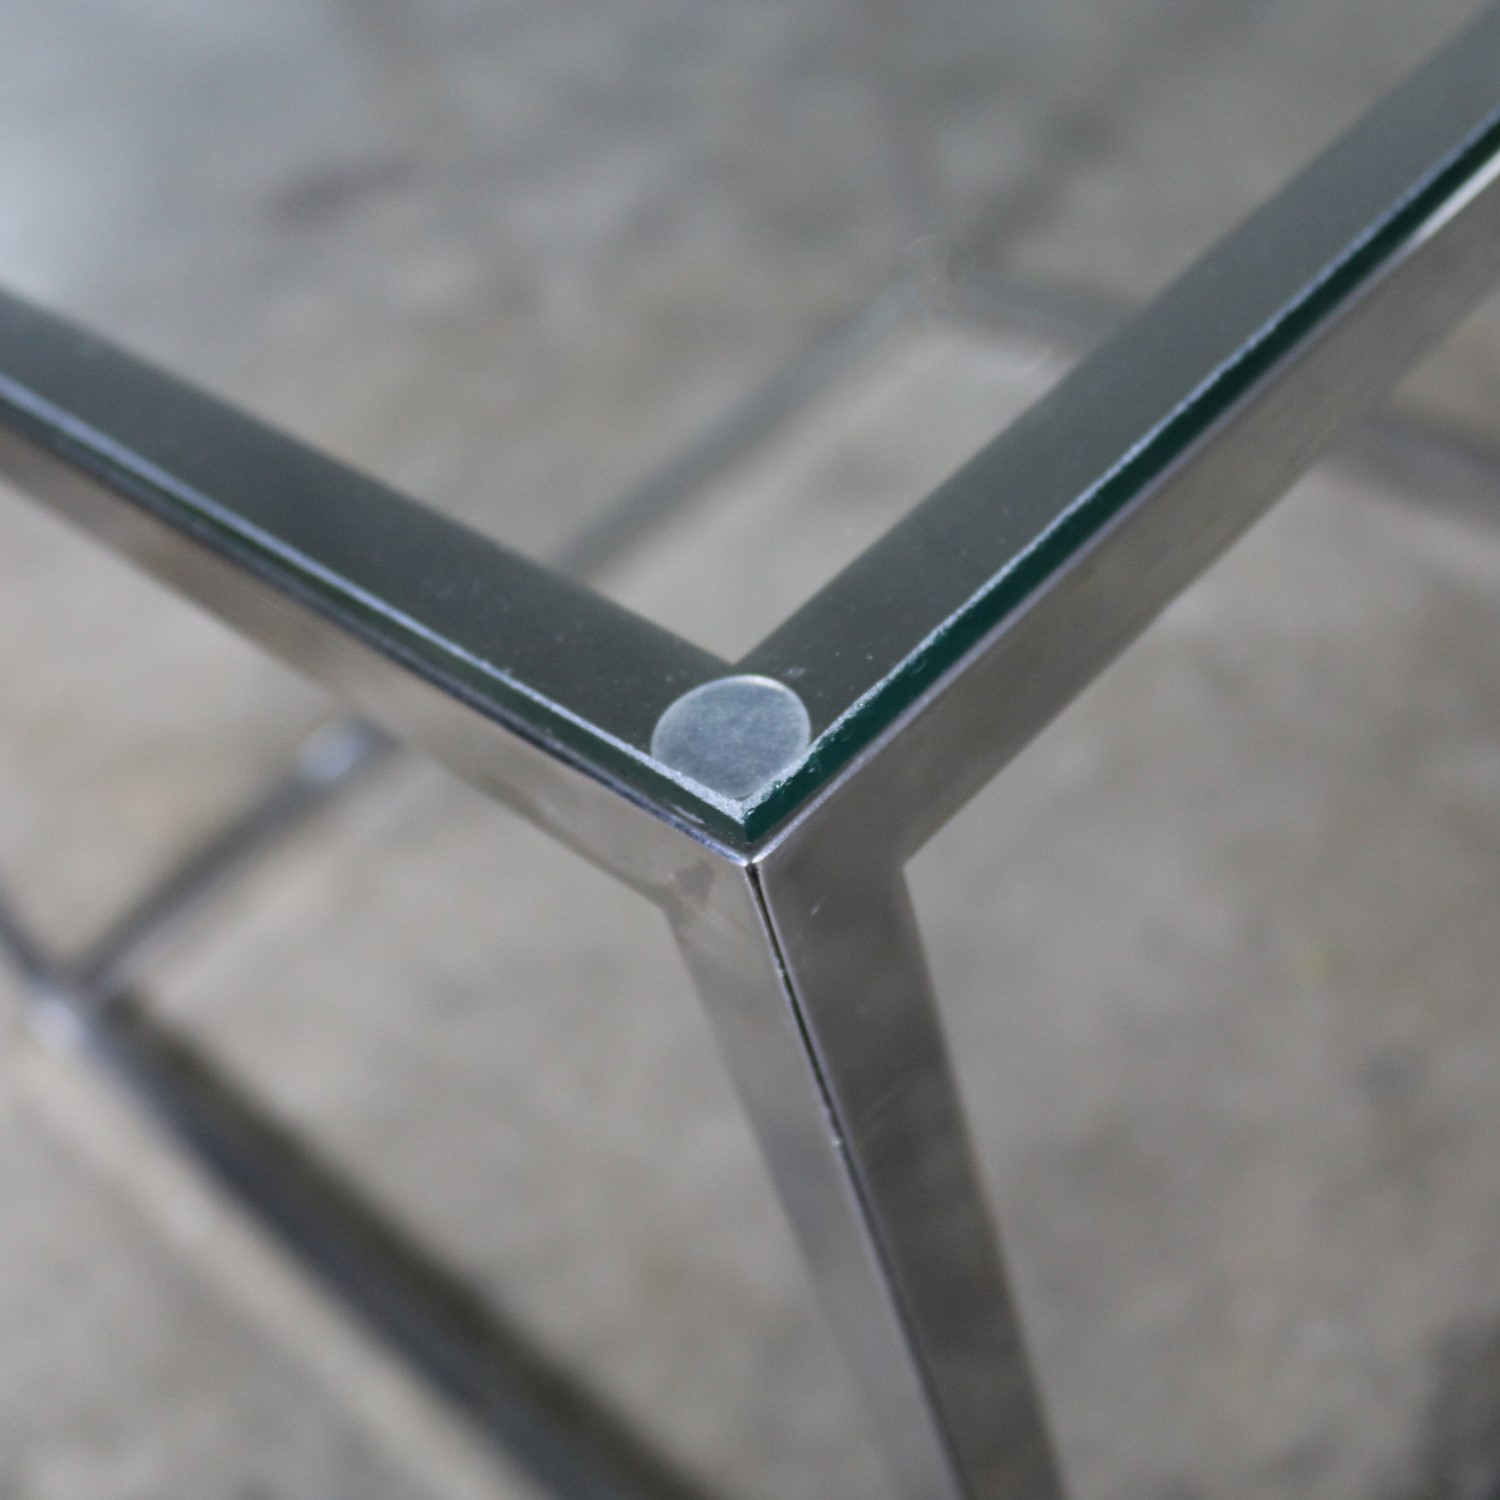 Chrome Cube End Table with Glass Top Manner of Milo Baughman